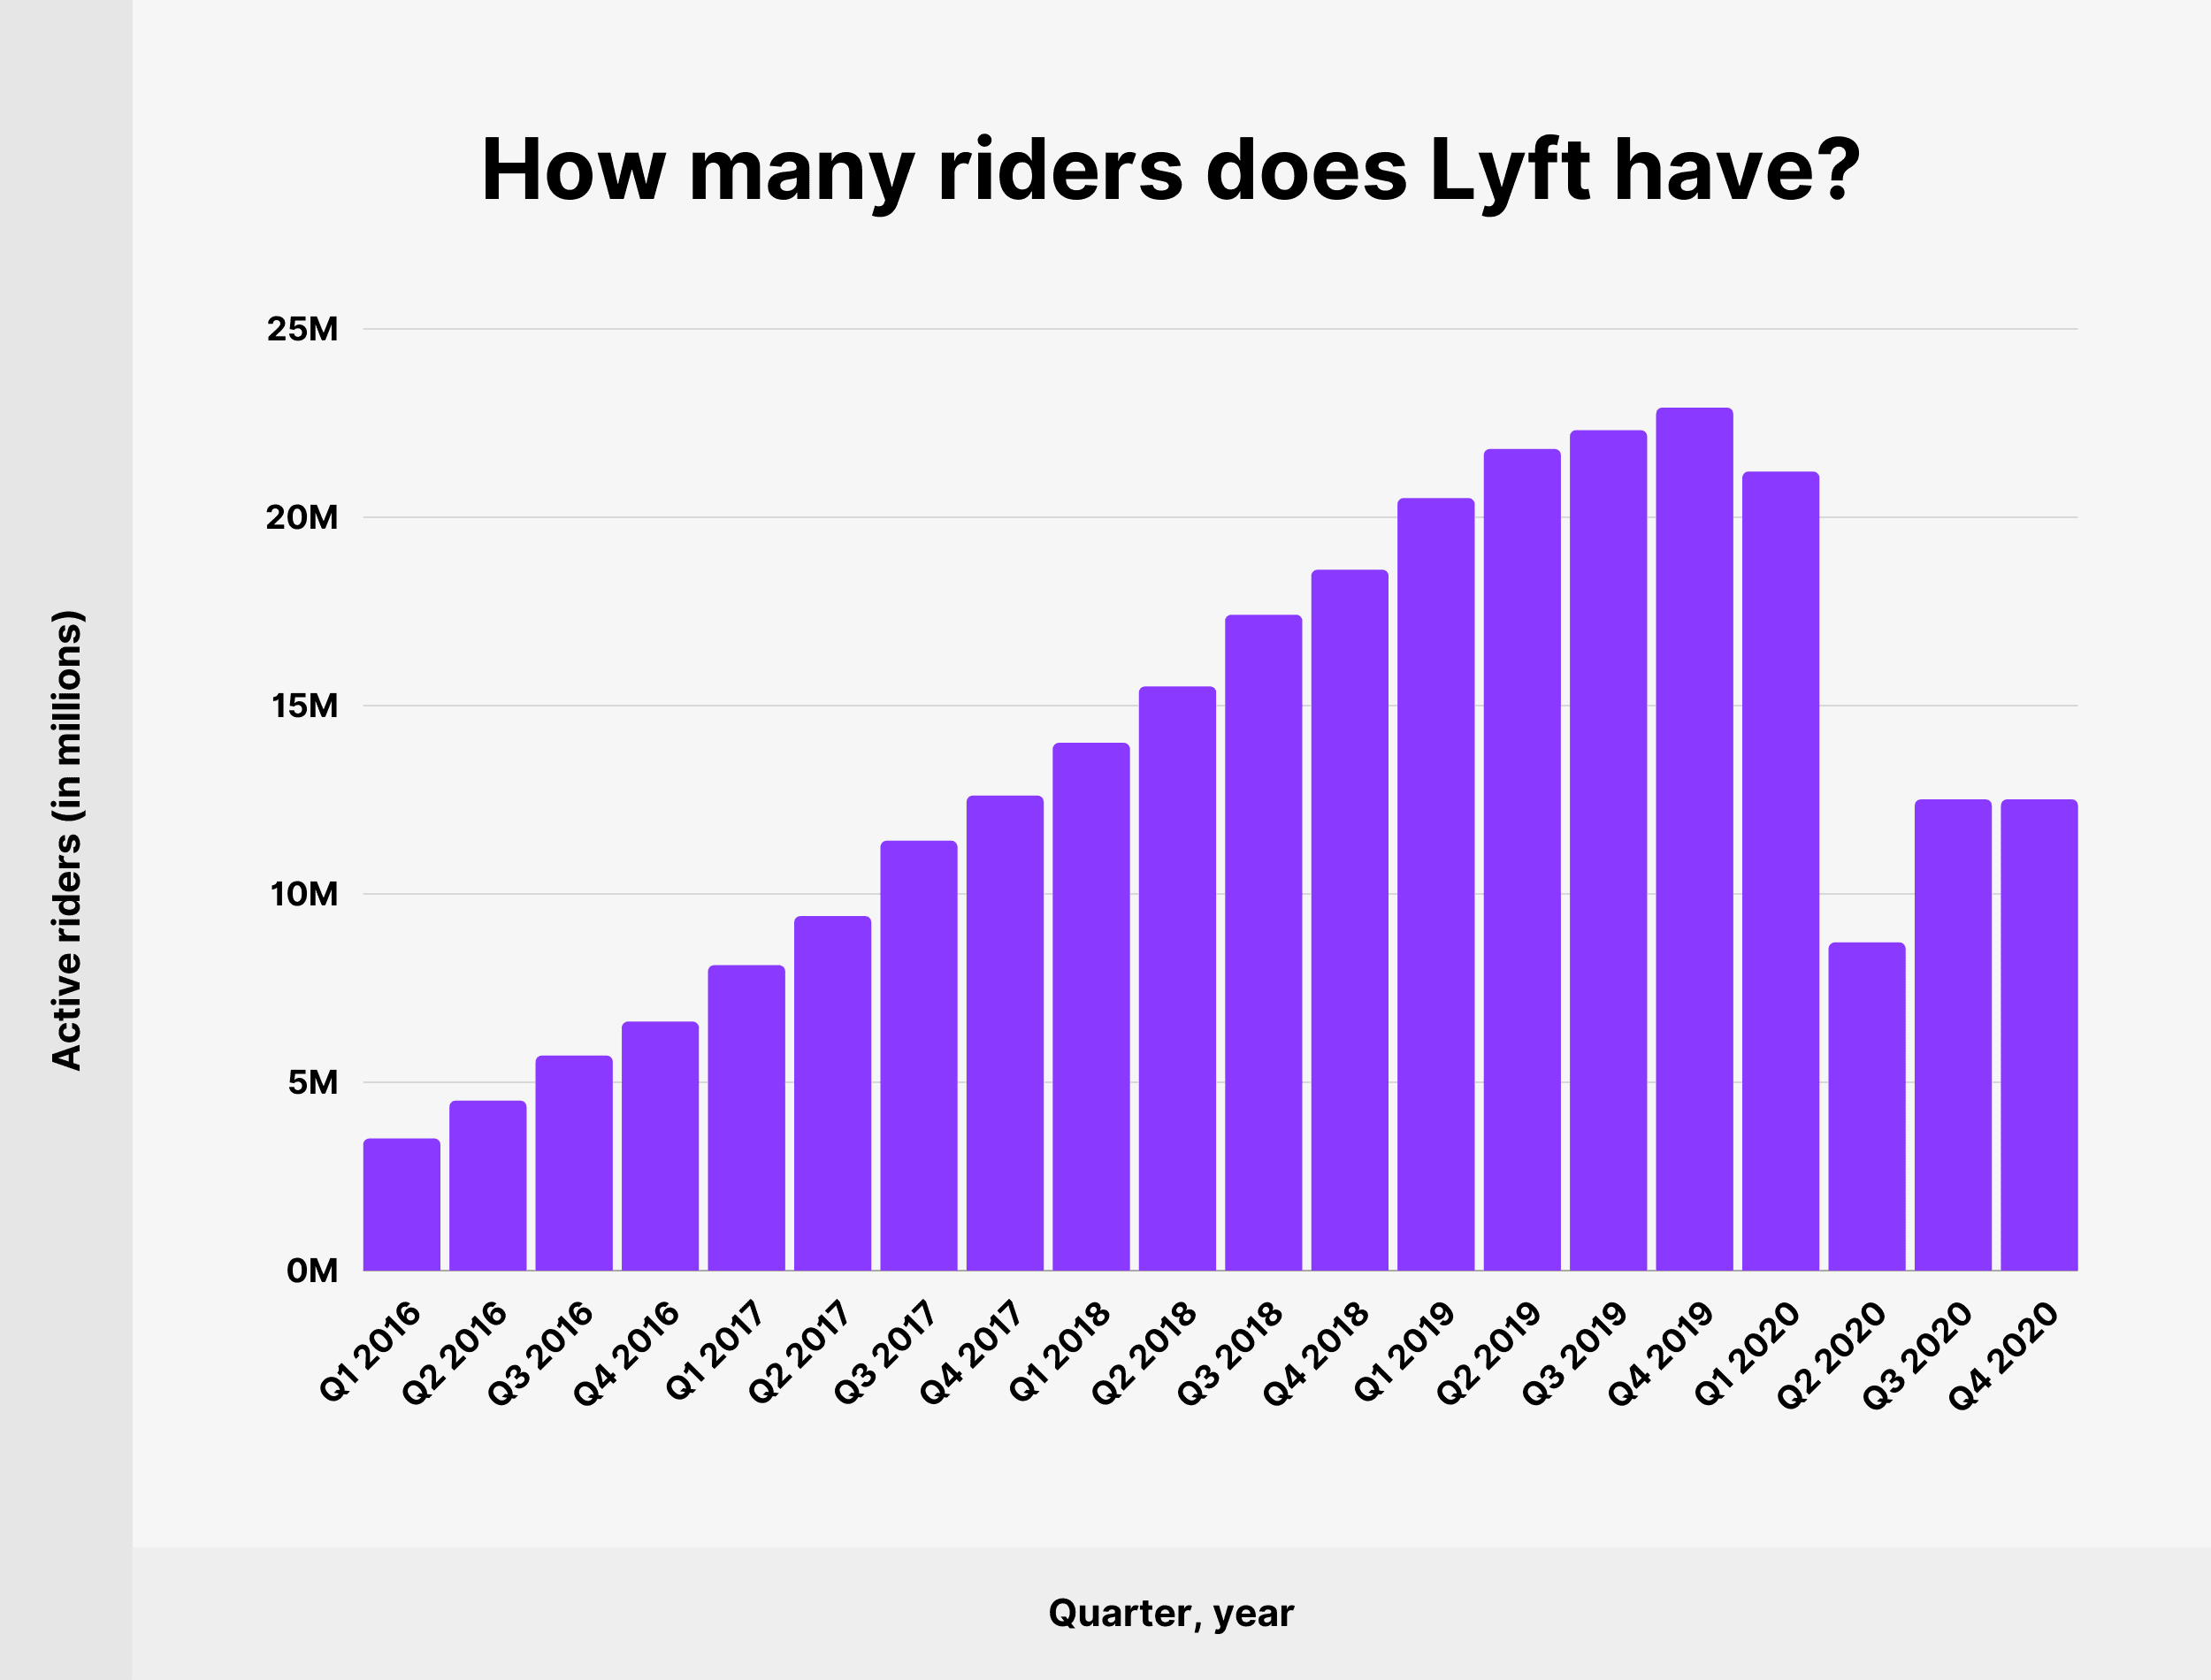 How many riders does Lyft have?